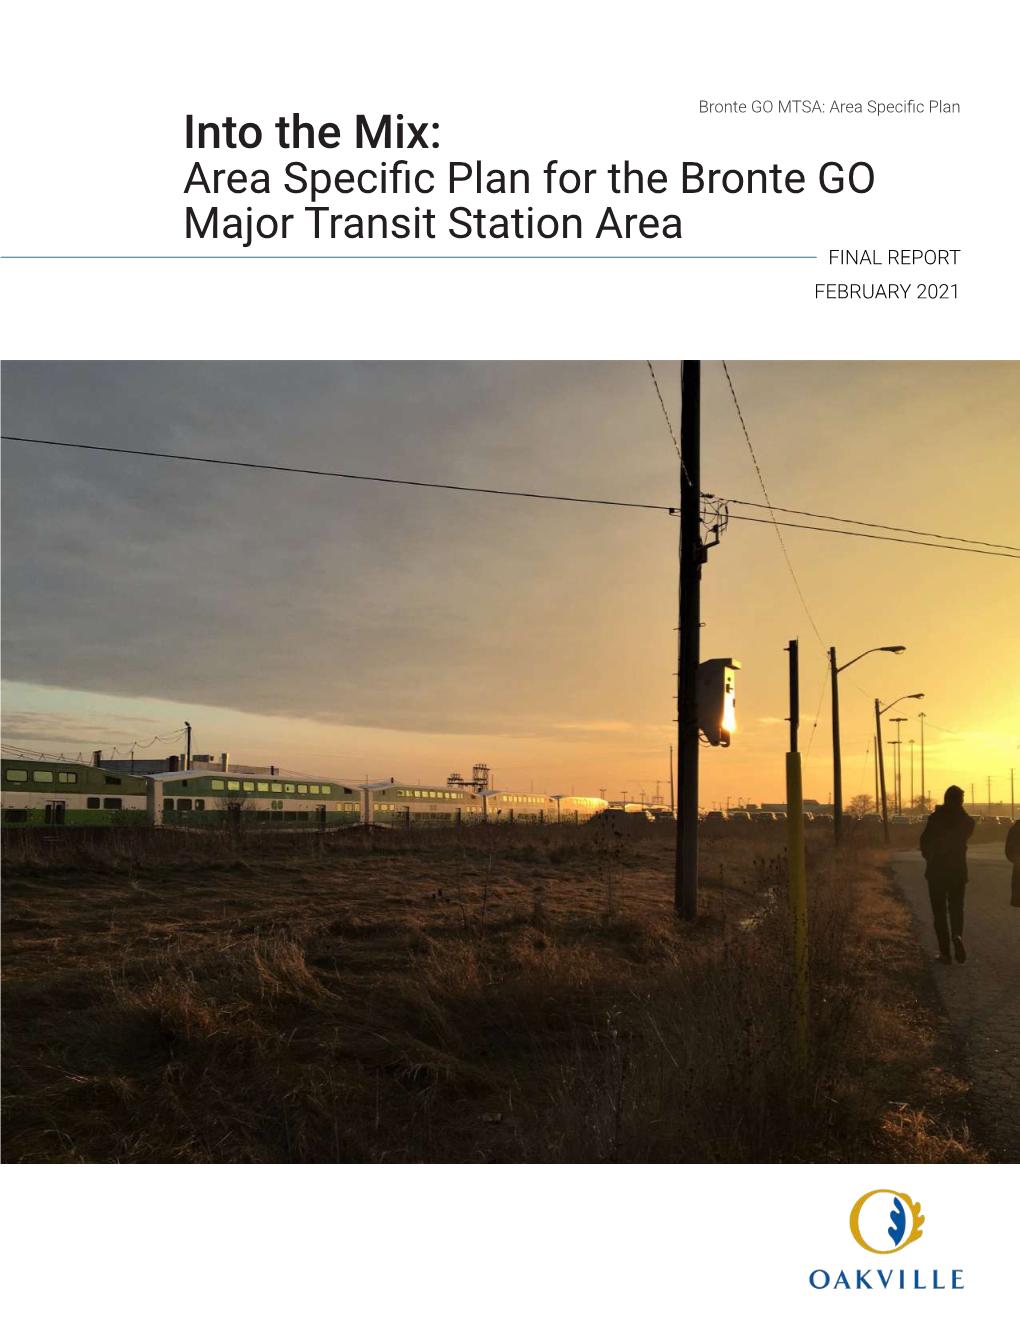 Area Specific Plan for the Bronte GO Major Transit Station Area FINAL REPORT FEBRUARY 2021